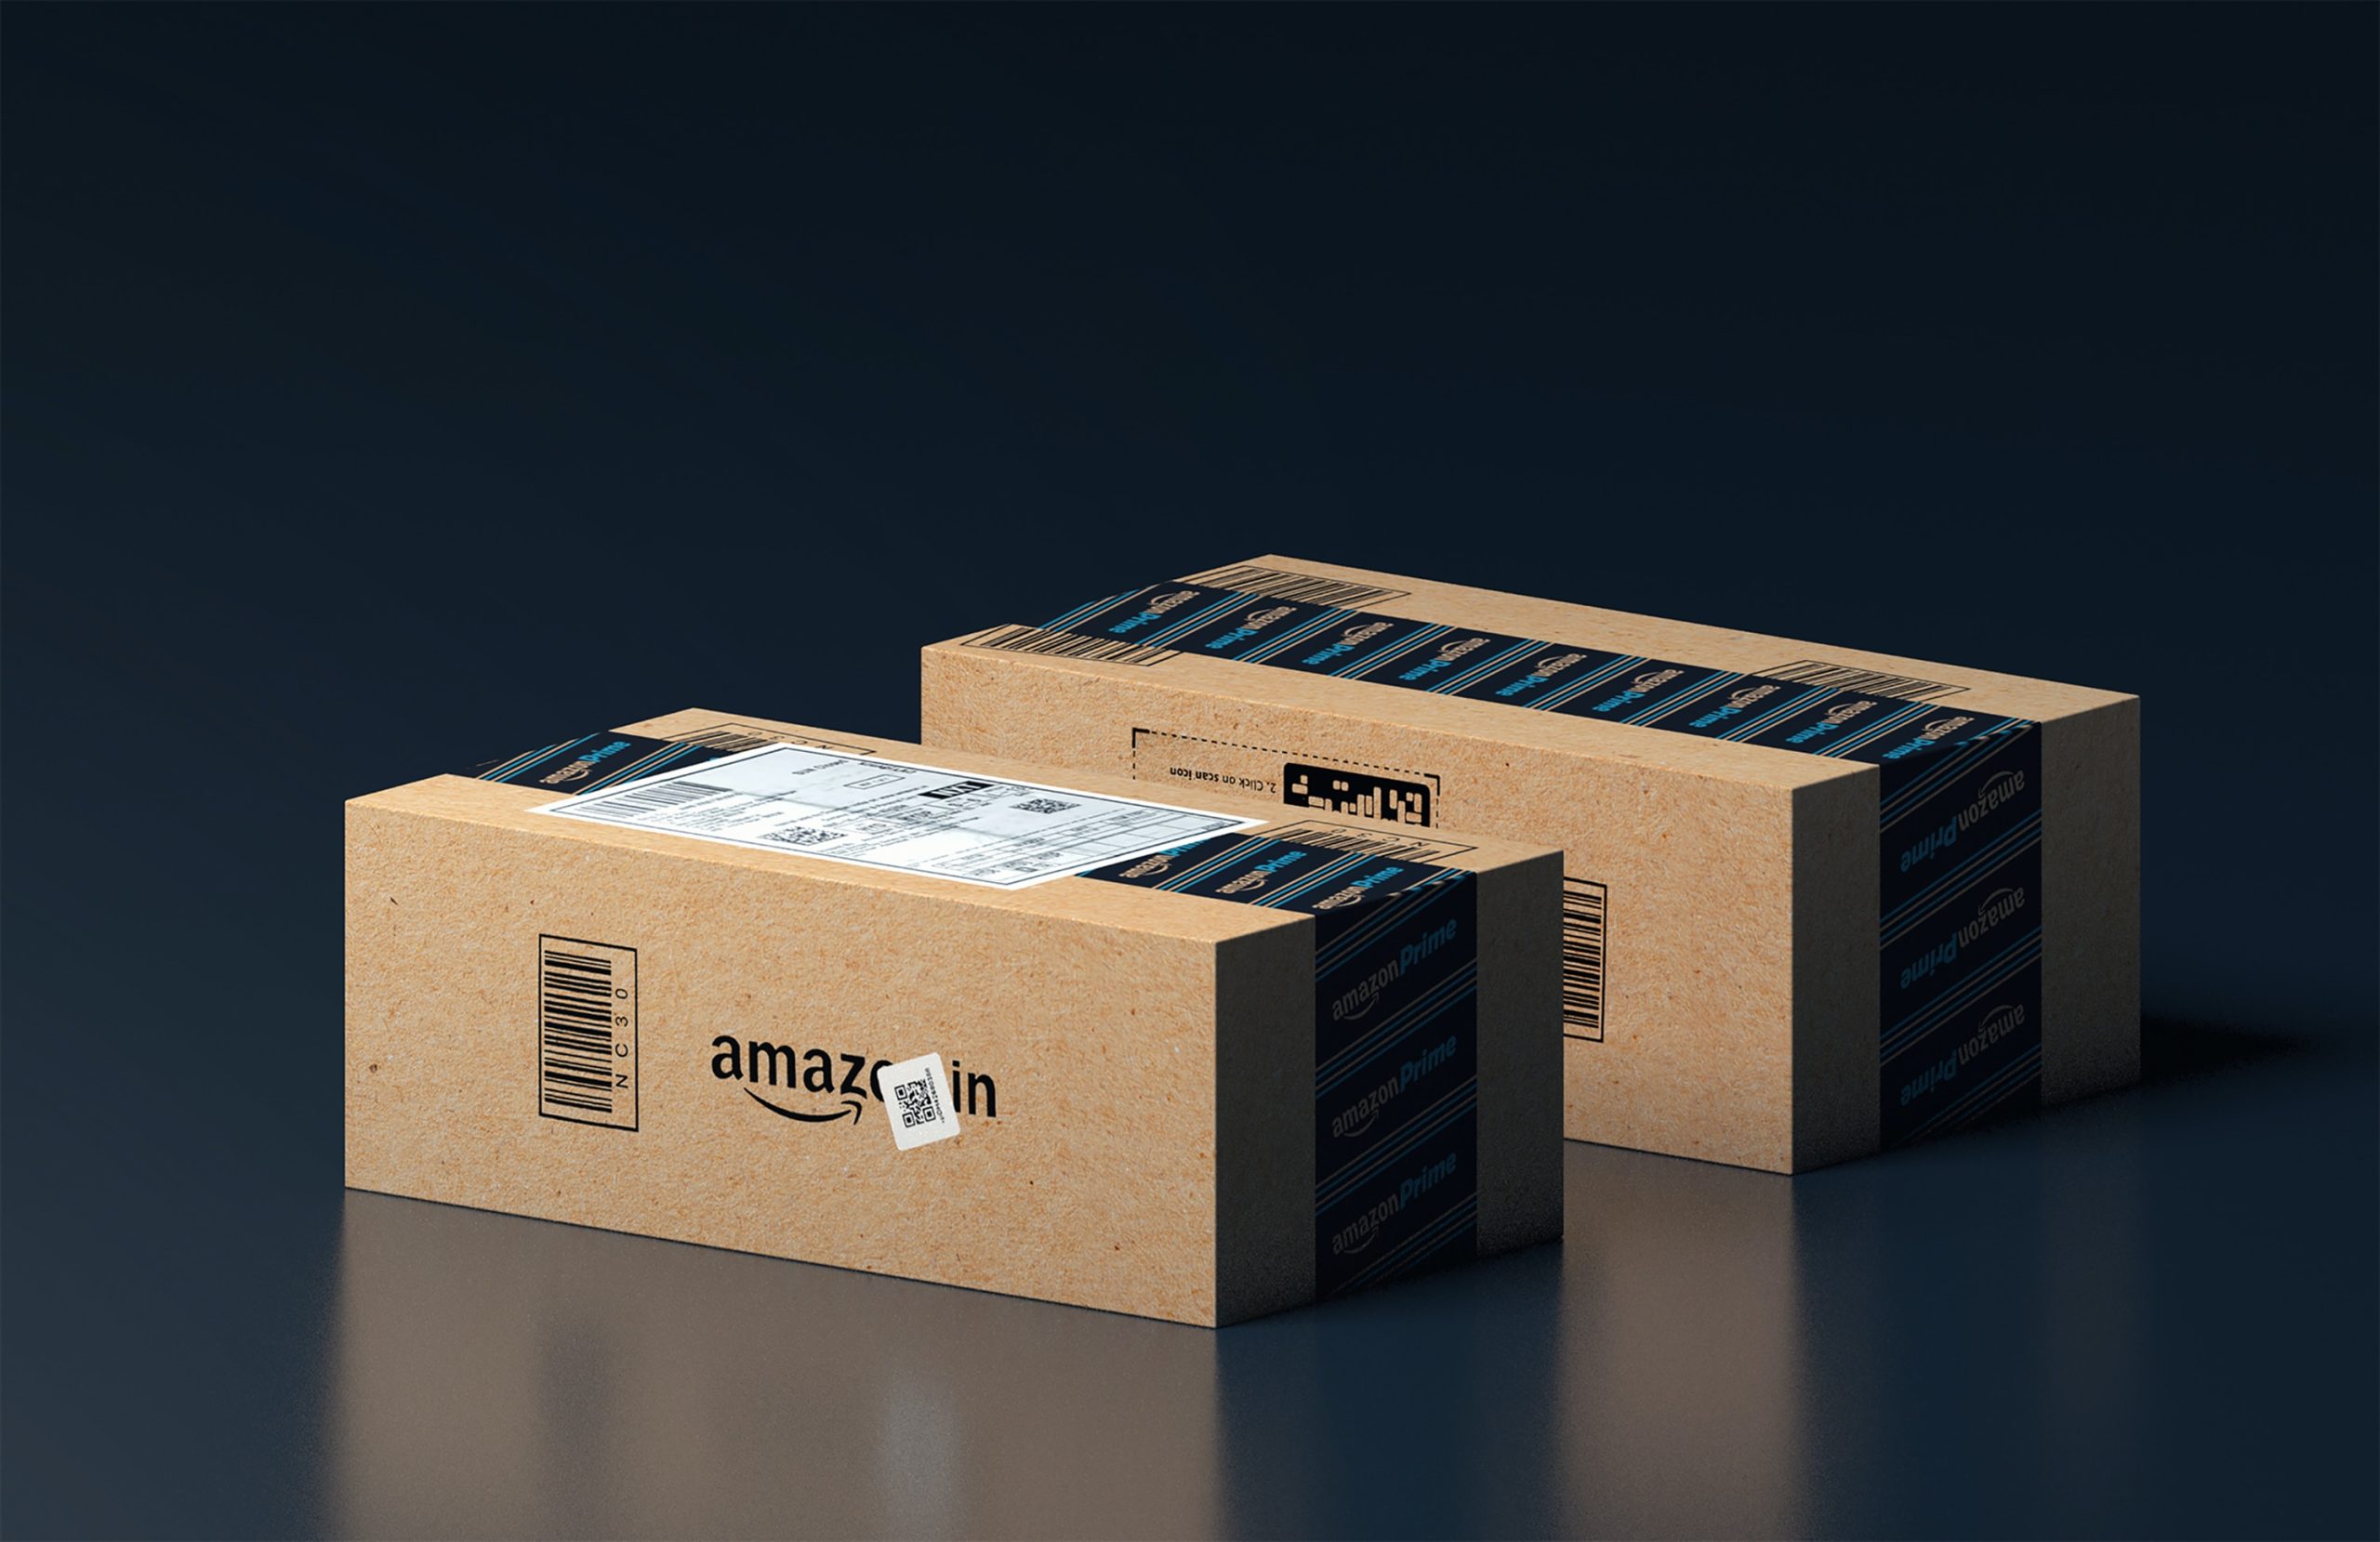 www.znewsservice.com further amazon strikes on the cards as two new warehouses commence industrial action ballots anirudh wkezstqxktq unsplash scaled